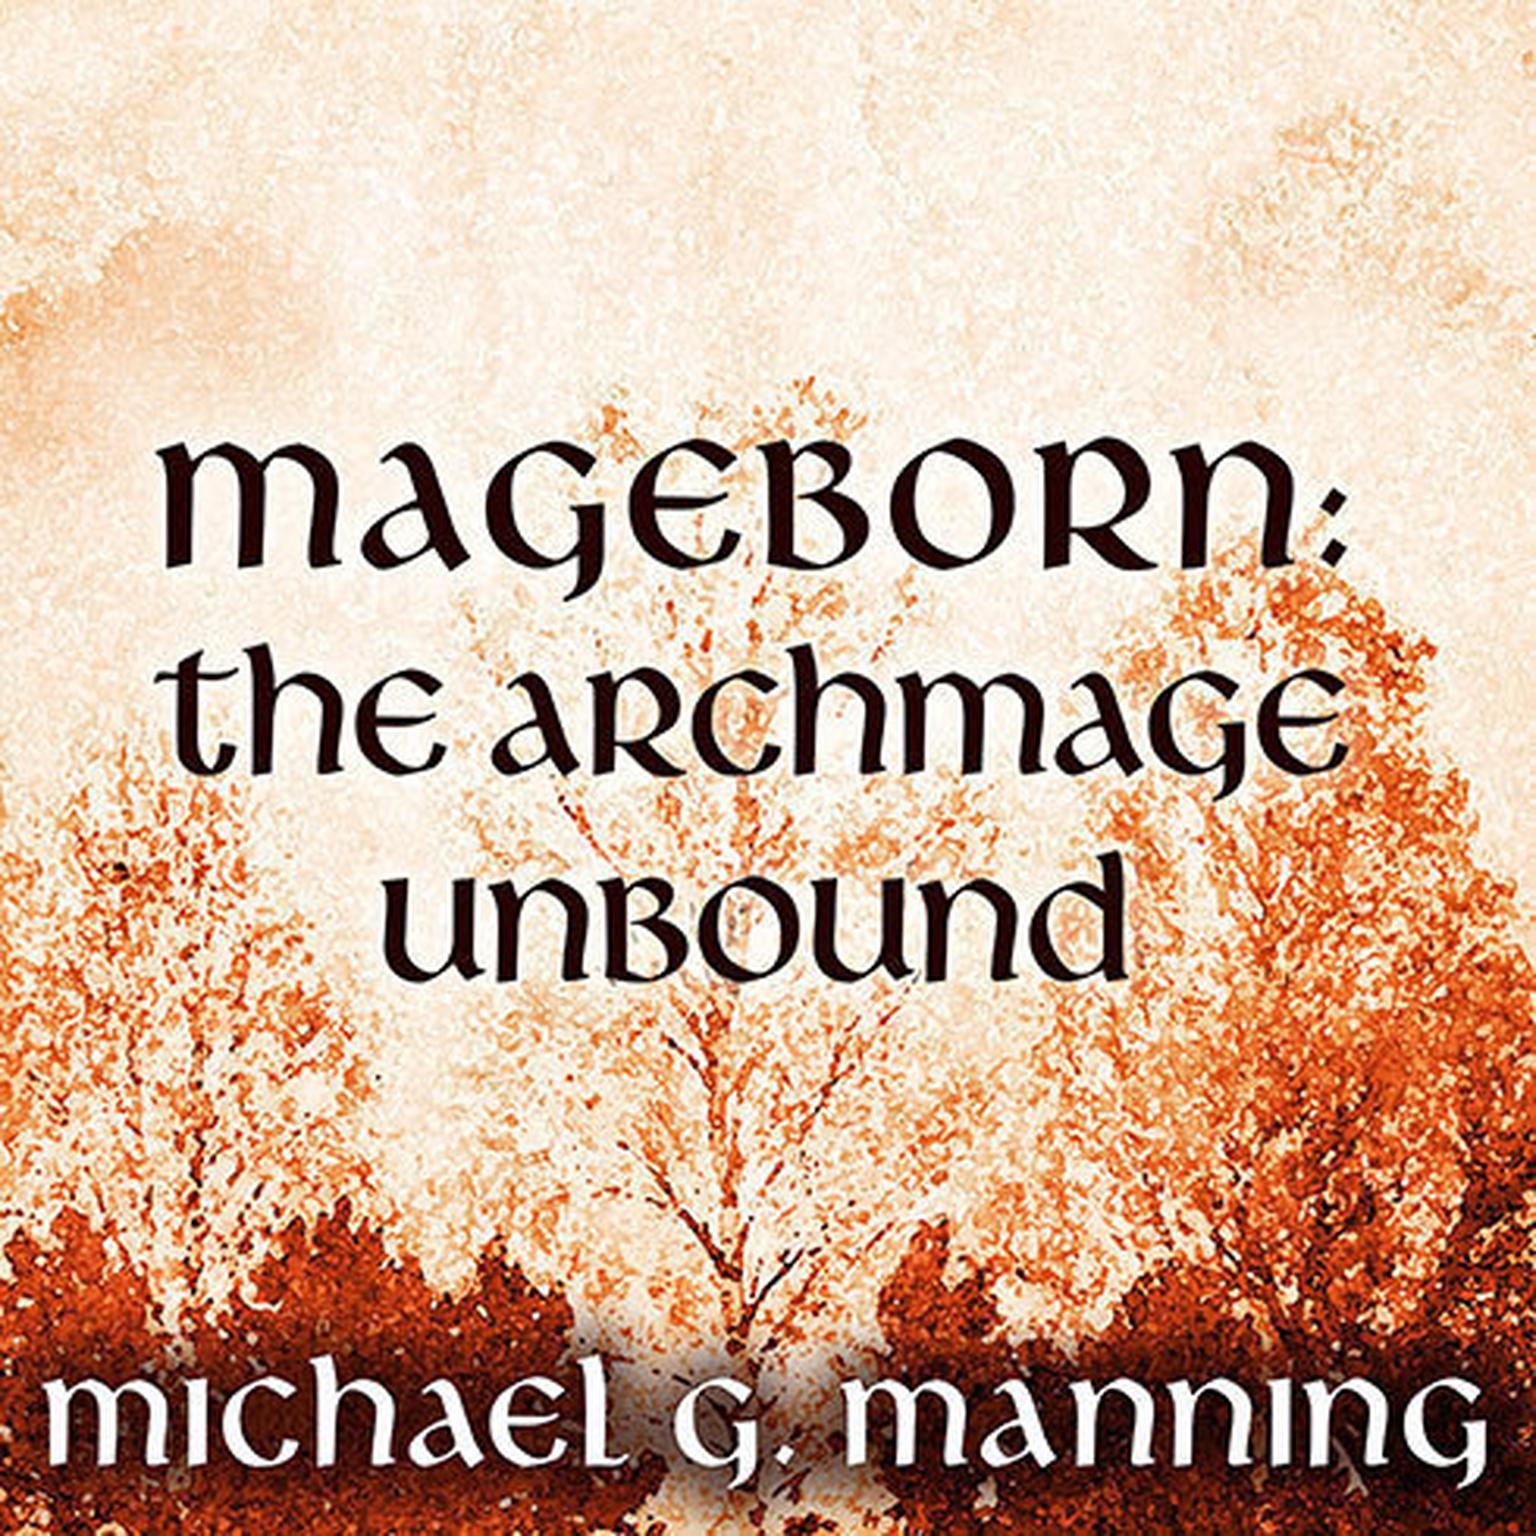 Mageborn: The Archmage Unbound Audiobook, by Michael G. Manning